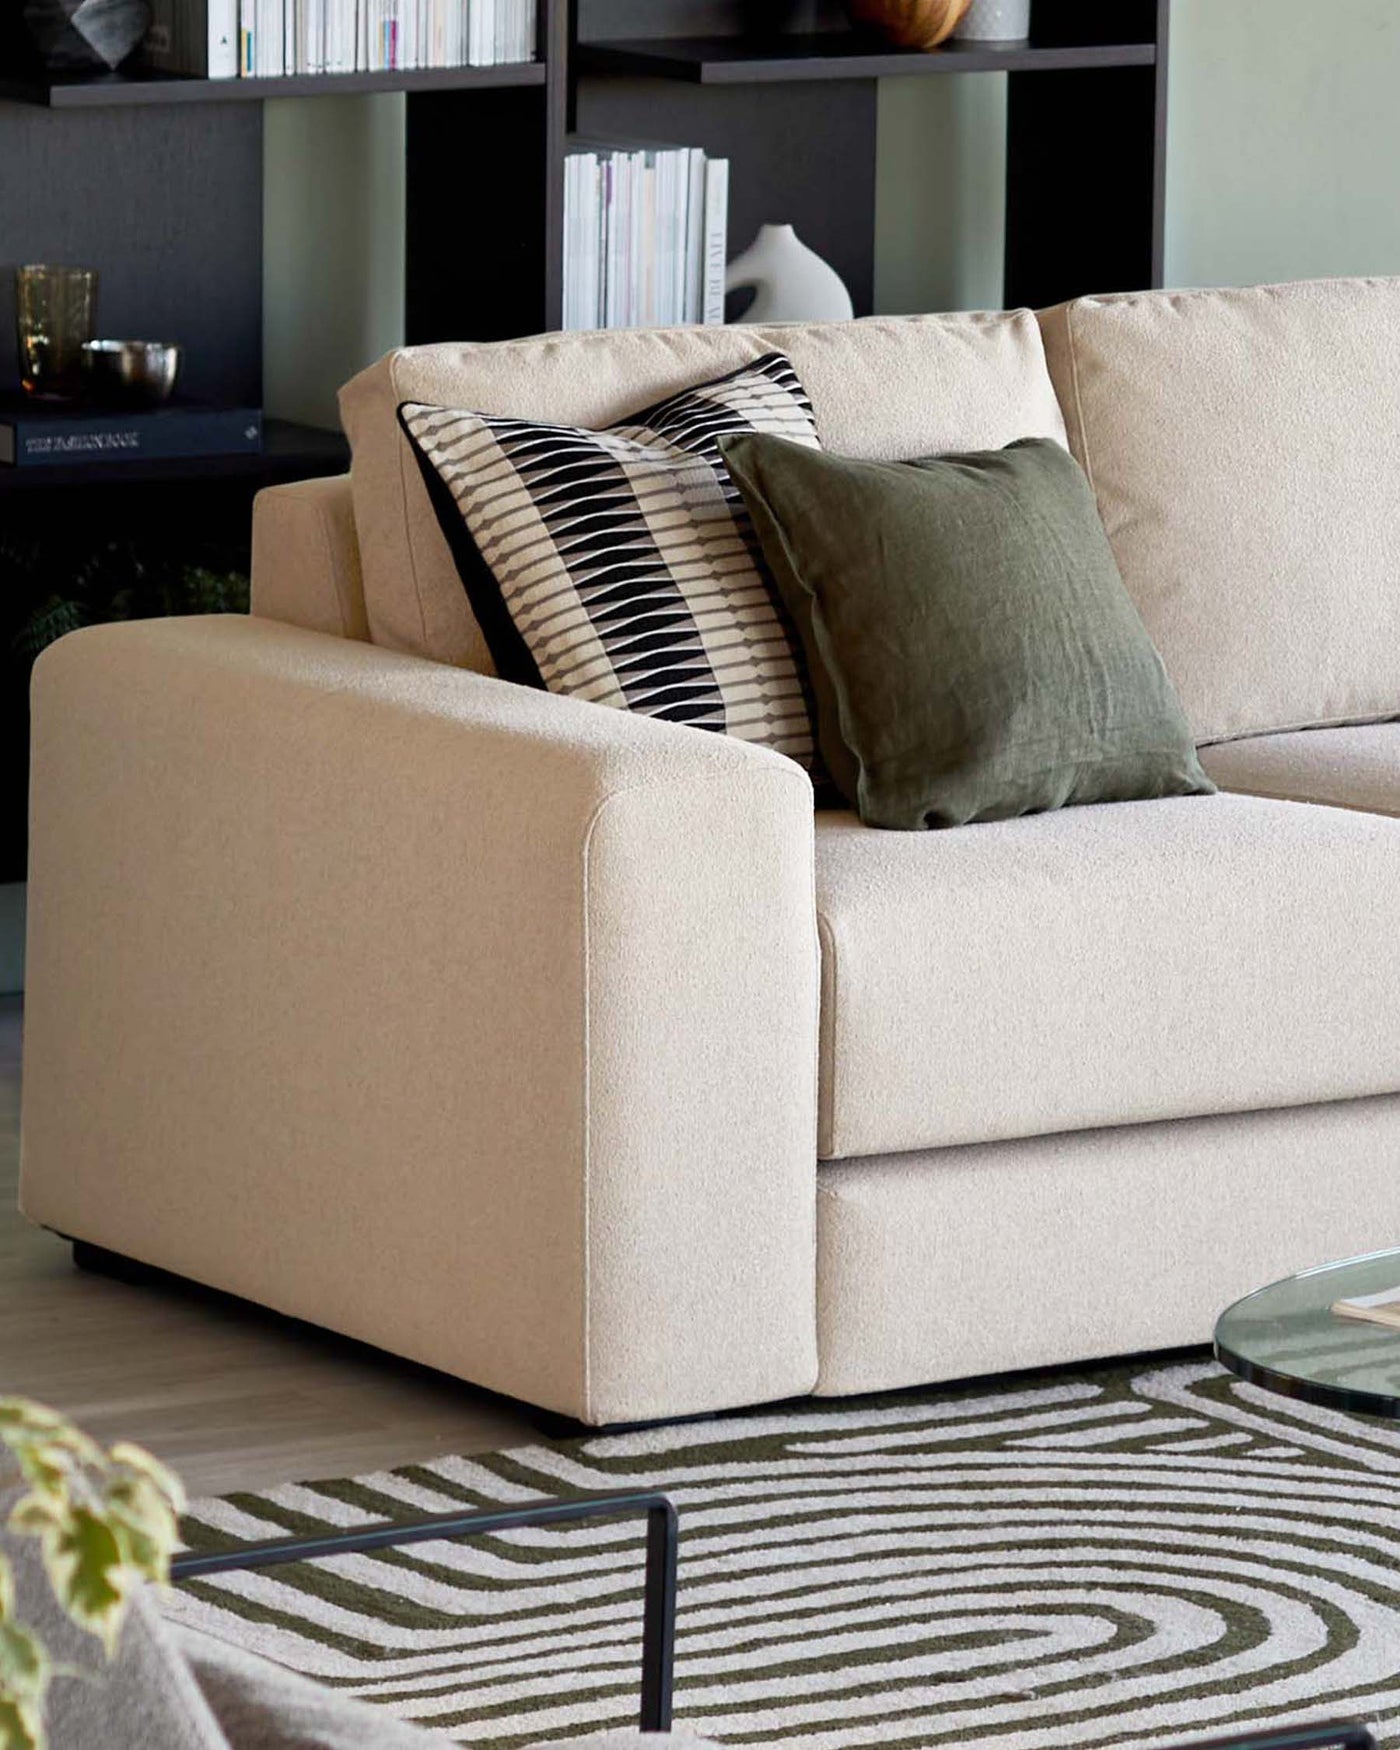 Beige upholstered sofa with a modern design, featuring clean lines, a squared-off armrest, and plush back cushions. The sofa is accented with an assortment of decorative pillows, including one with black and white stripes and another in solid olive green. In the background, a dark grey shelving unit houses an array of books and decorative objects. A round glass-top coffee table with a slim black metal frame is partially visible, all resting on a geometric-patterned area rug in muted tones.